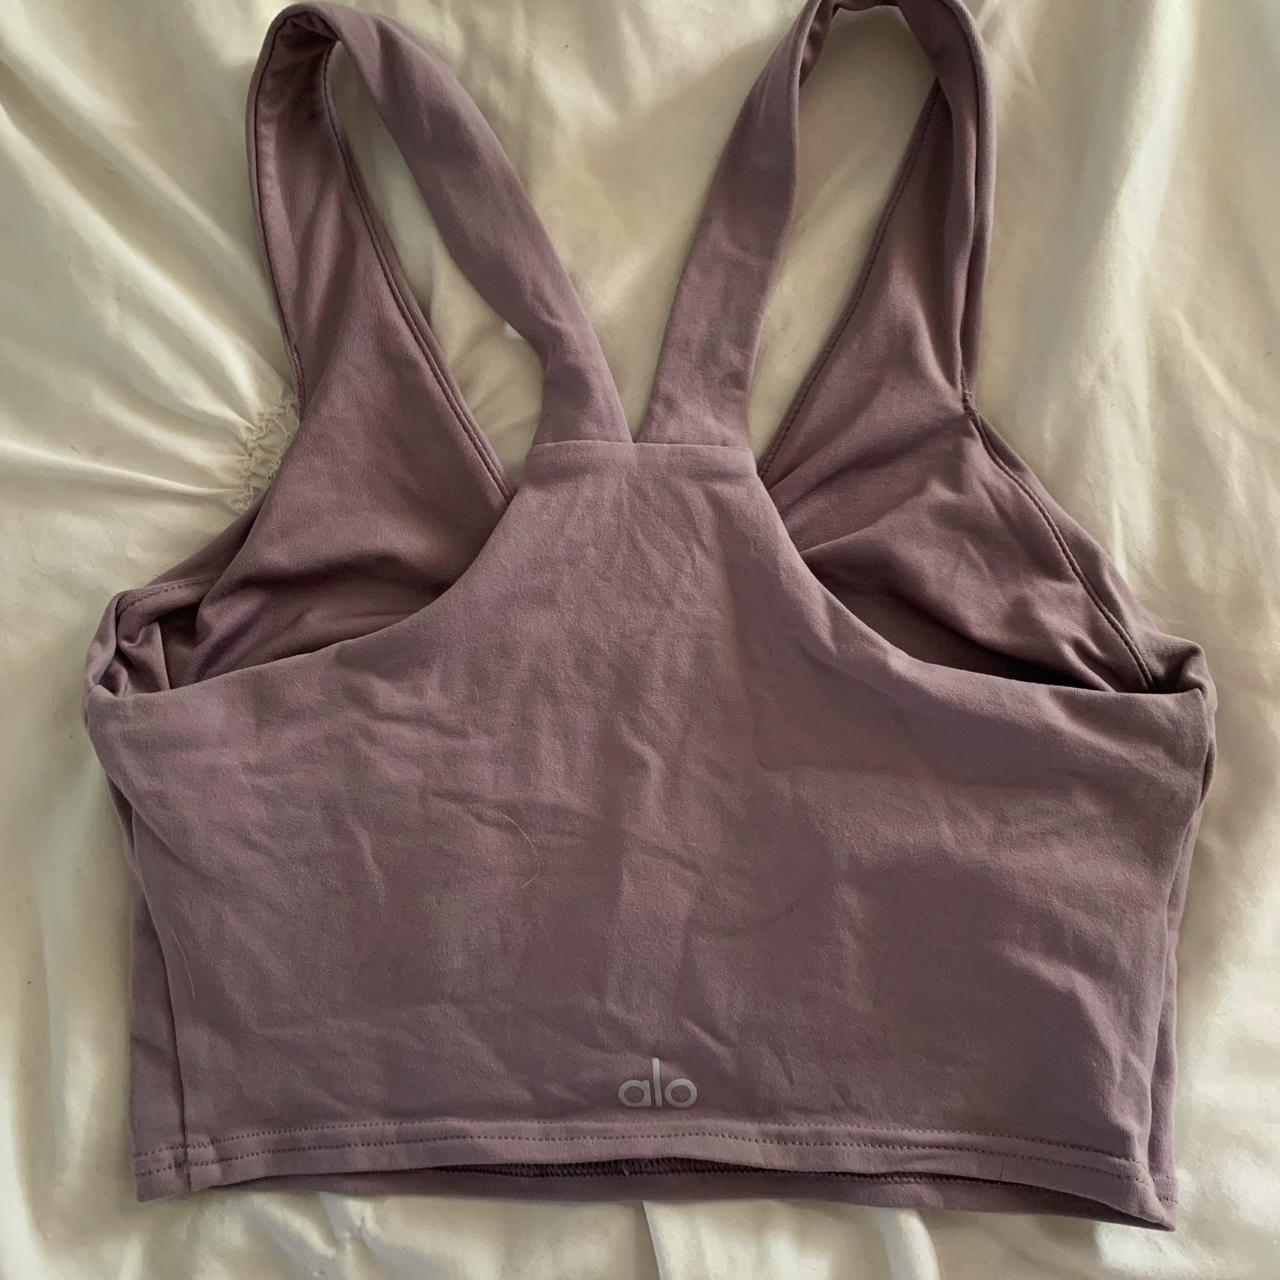 ALO Yoga Real Bra Tank, NWOT, no flaws , Size small